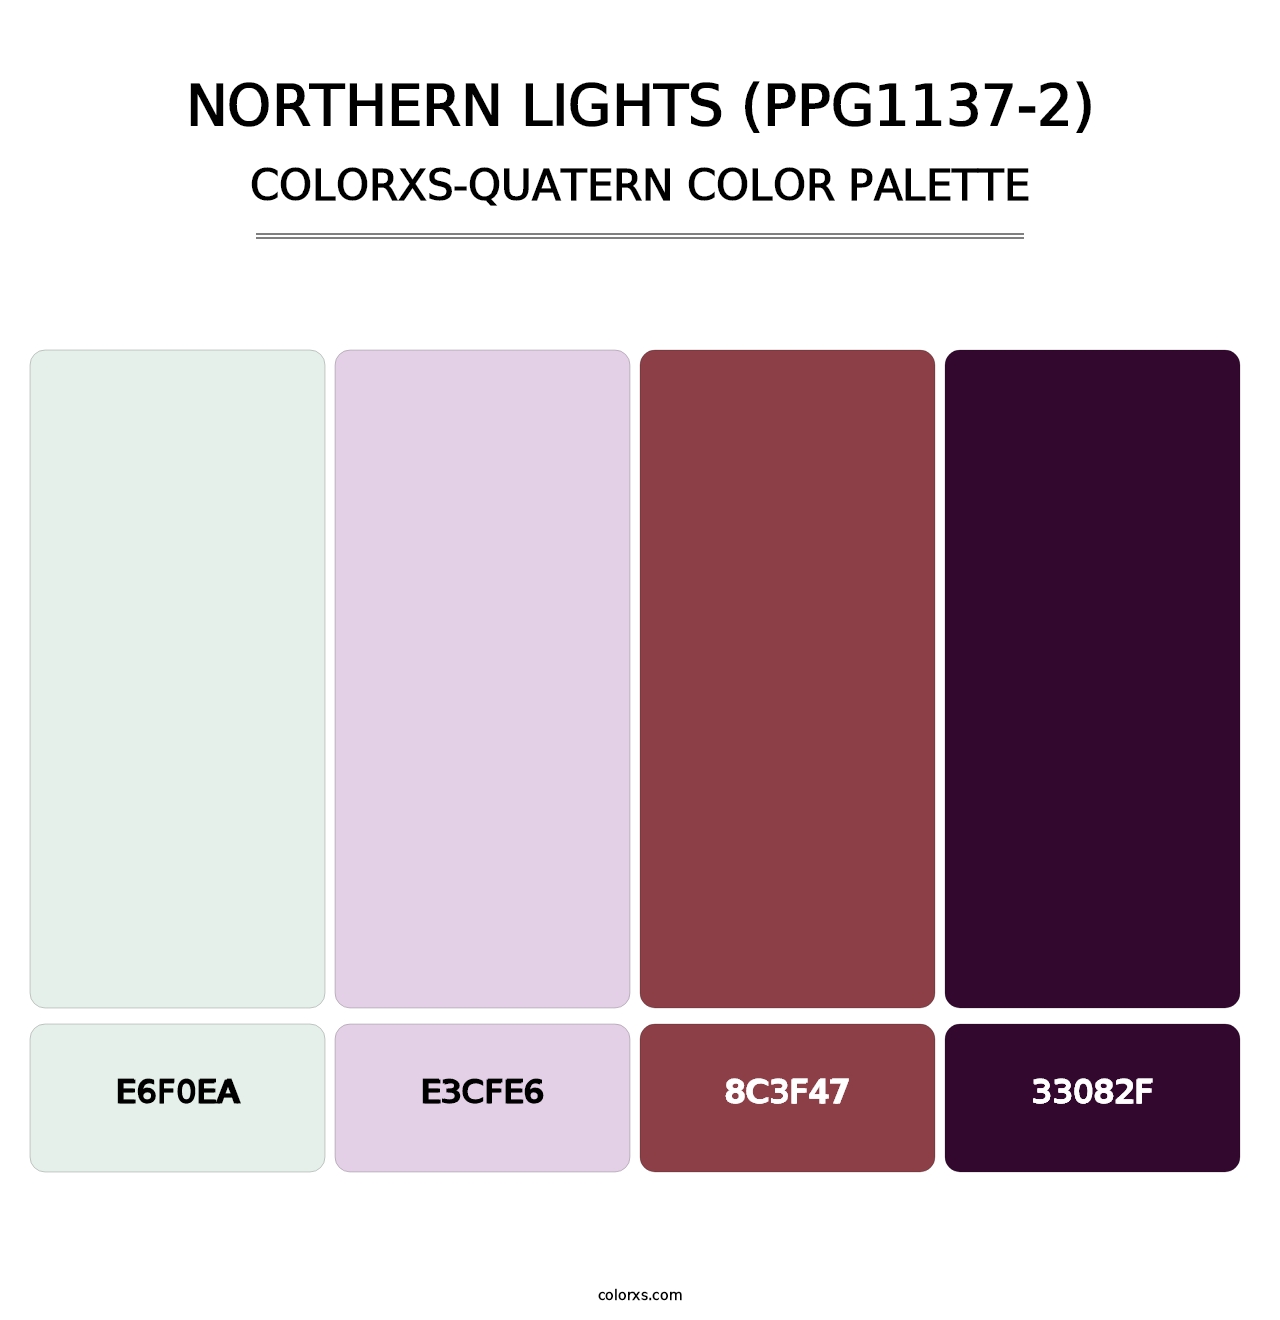 Northern Lights (PPG1137-2) - Colorxs Quatern Palette